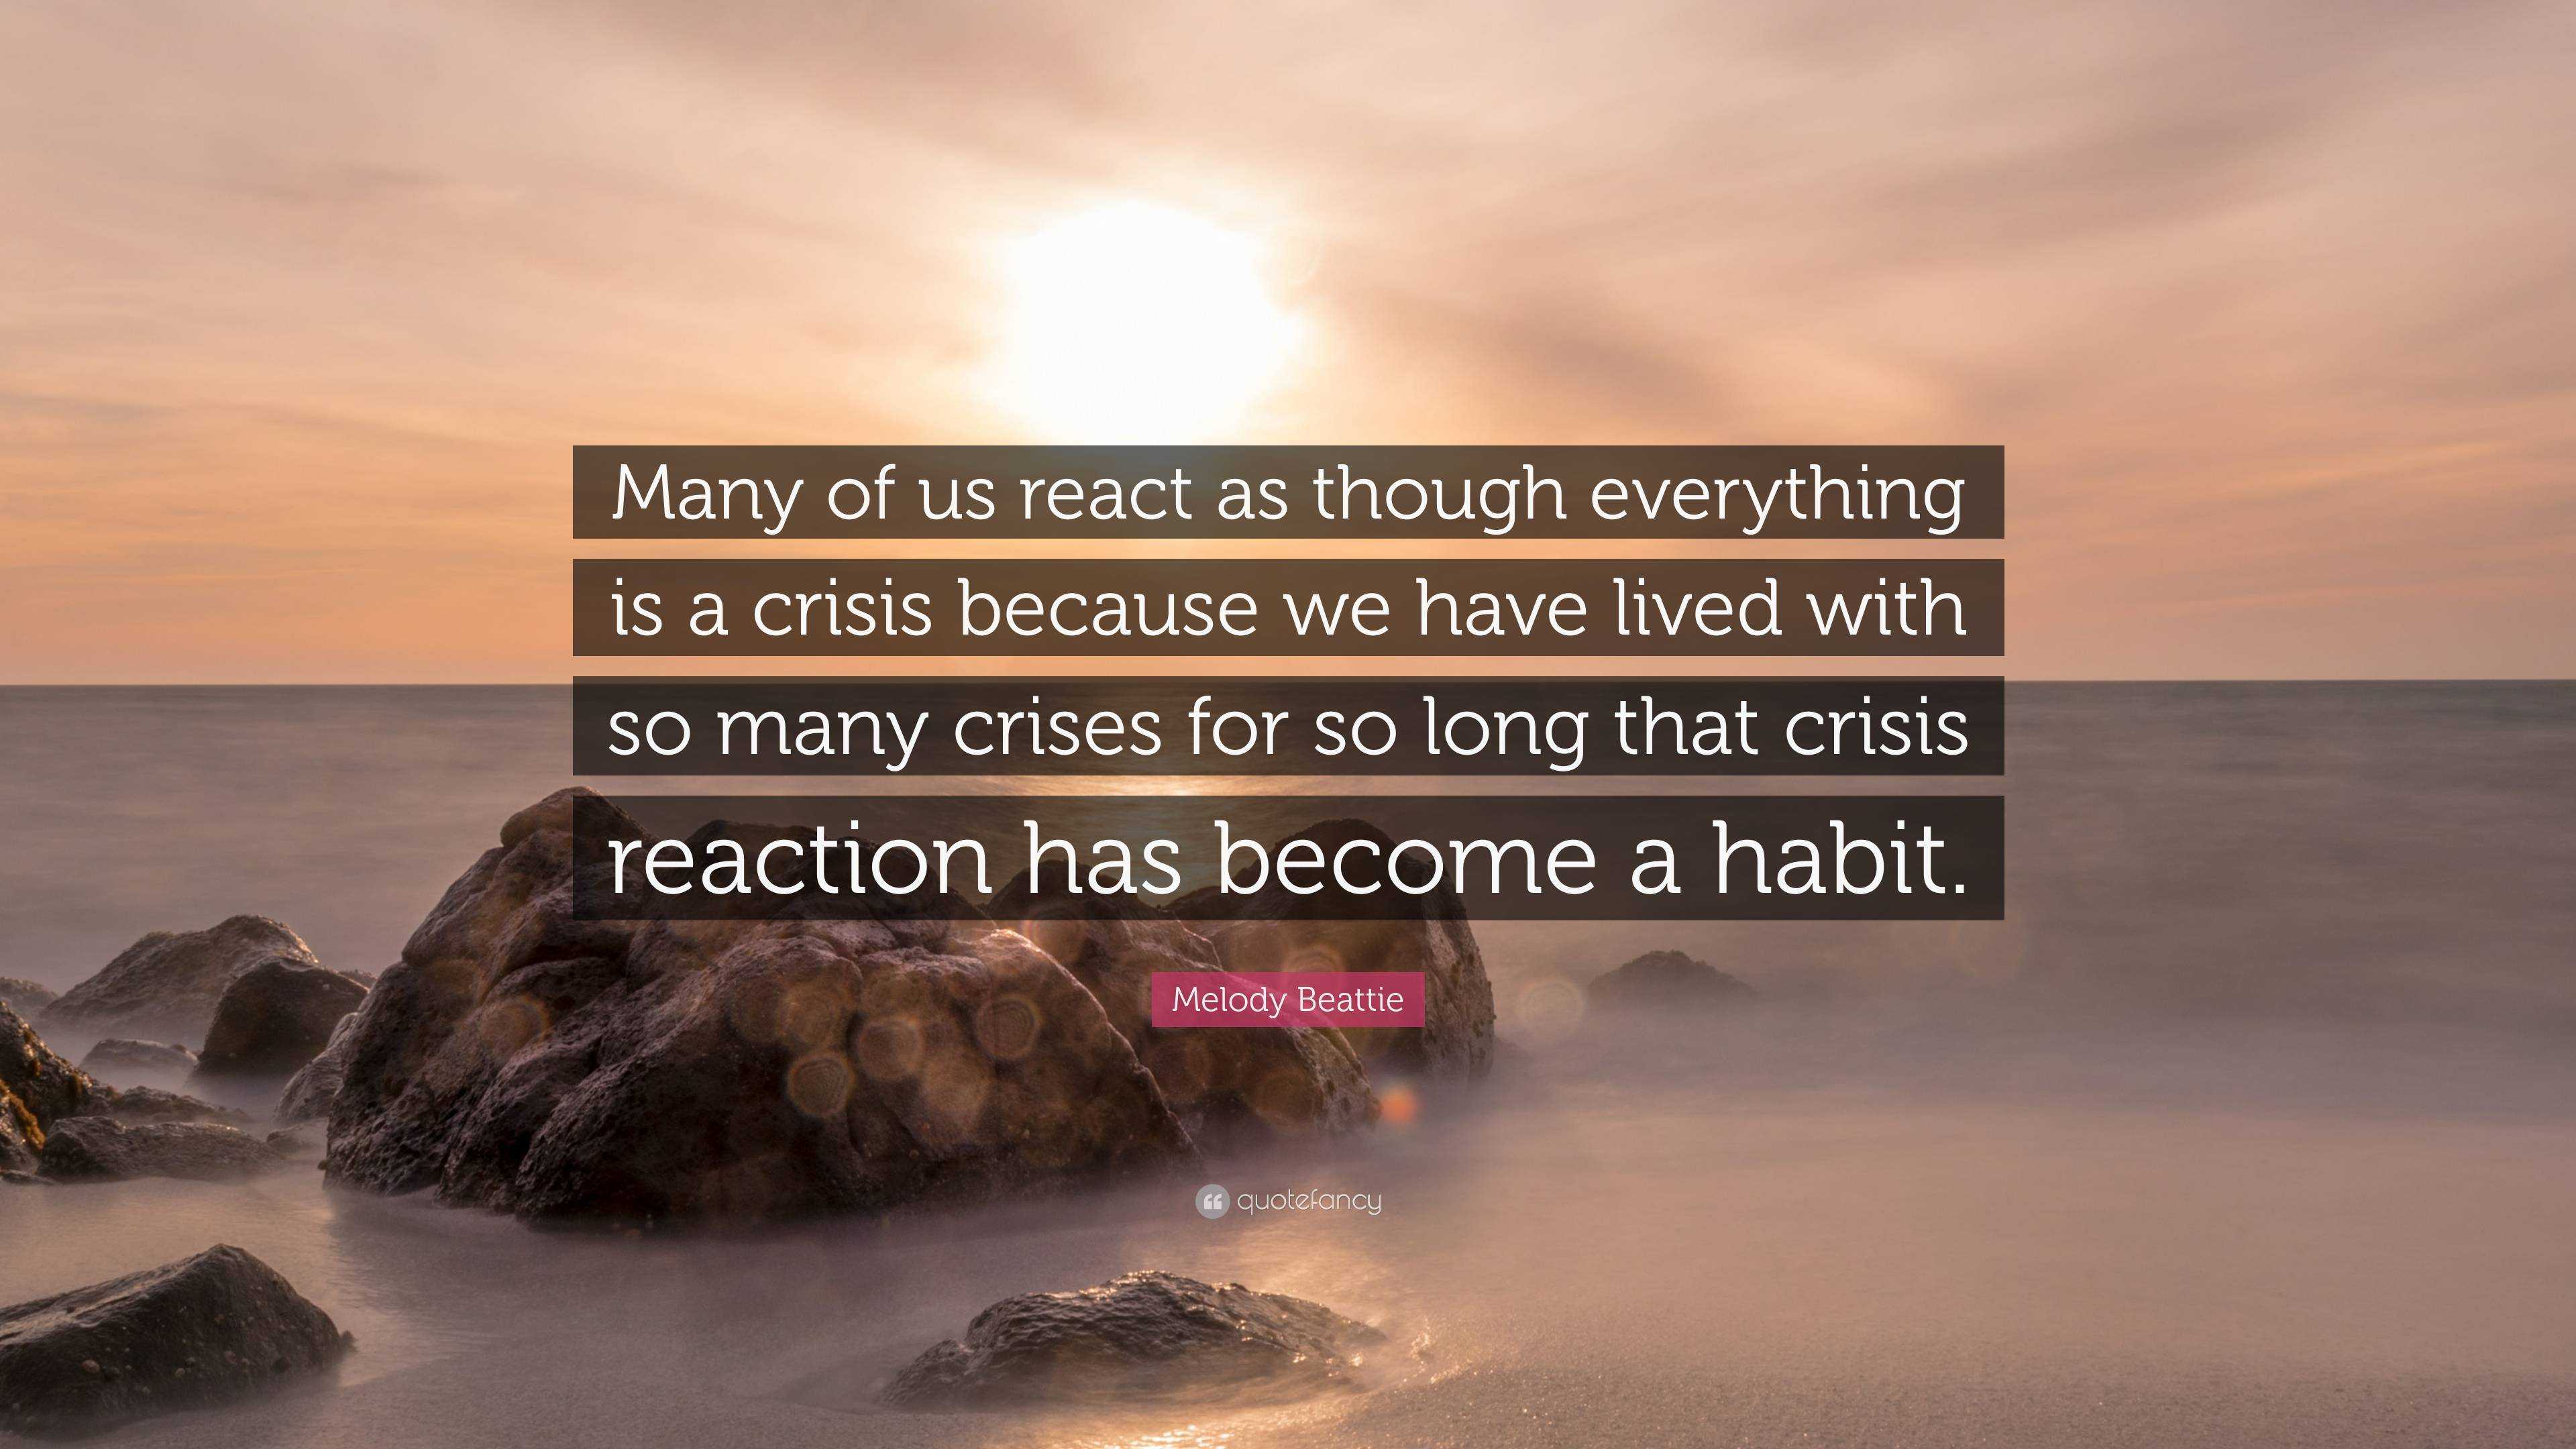 Melody Beattie Quote: “Many of us react as though everything is a crisis  because we have lived with so many crises for so long that crisis reac...”